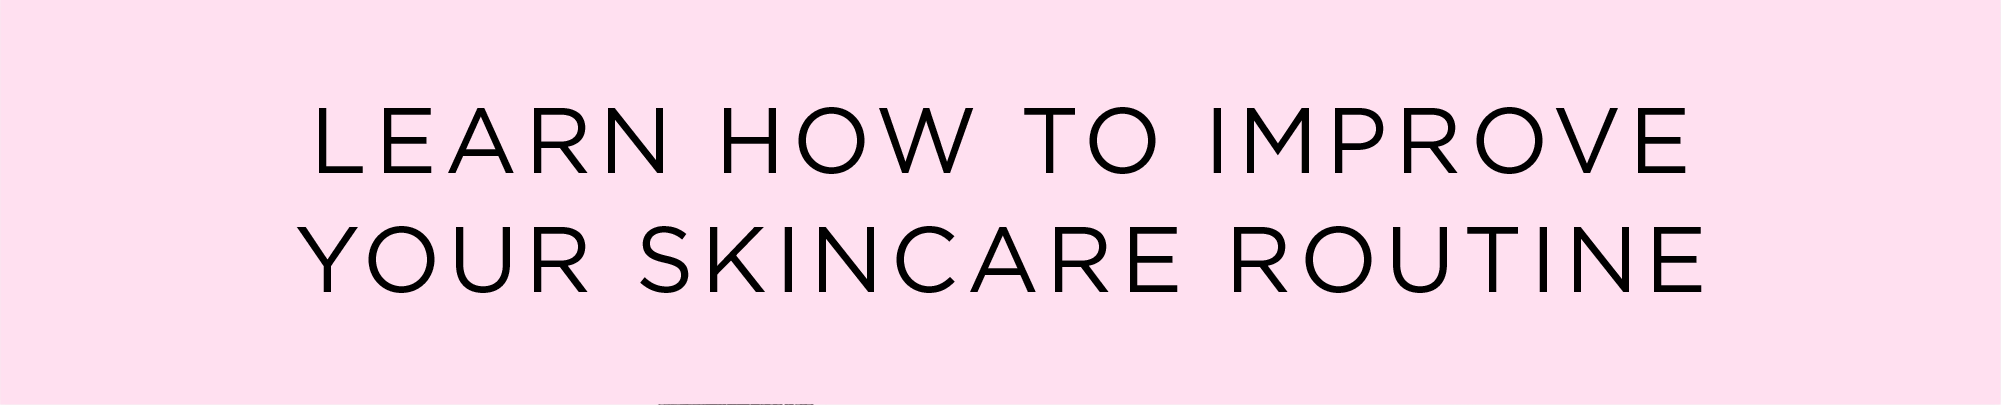 Learn How To Improve Your Skincare Routine